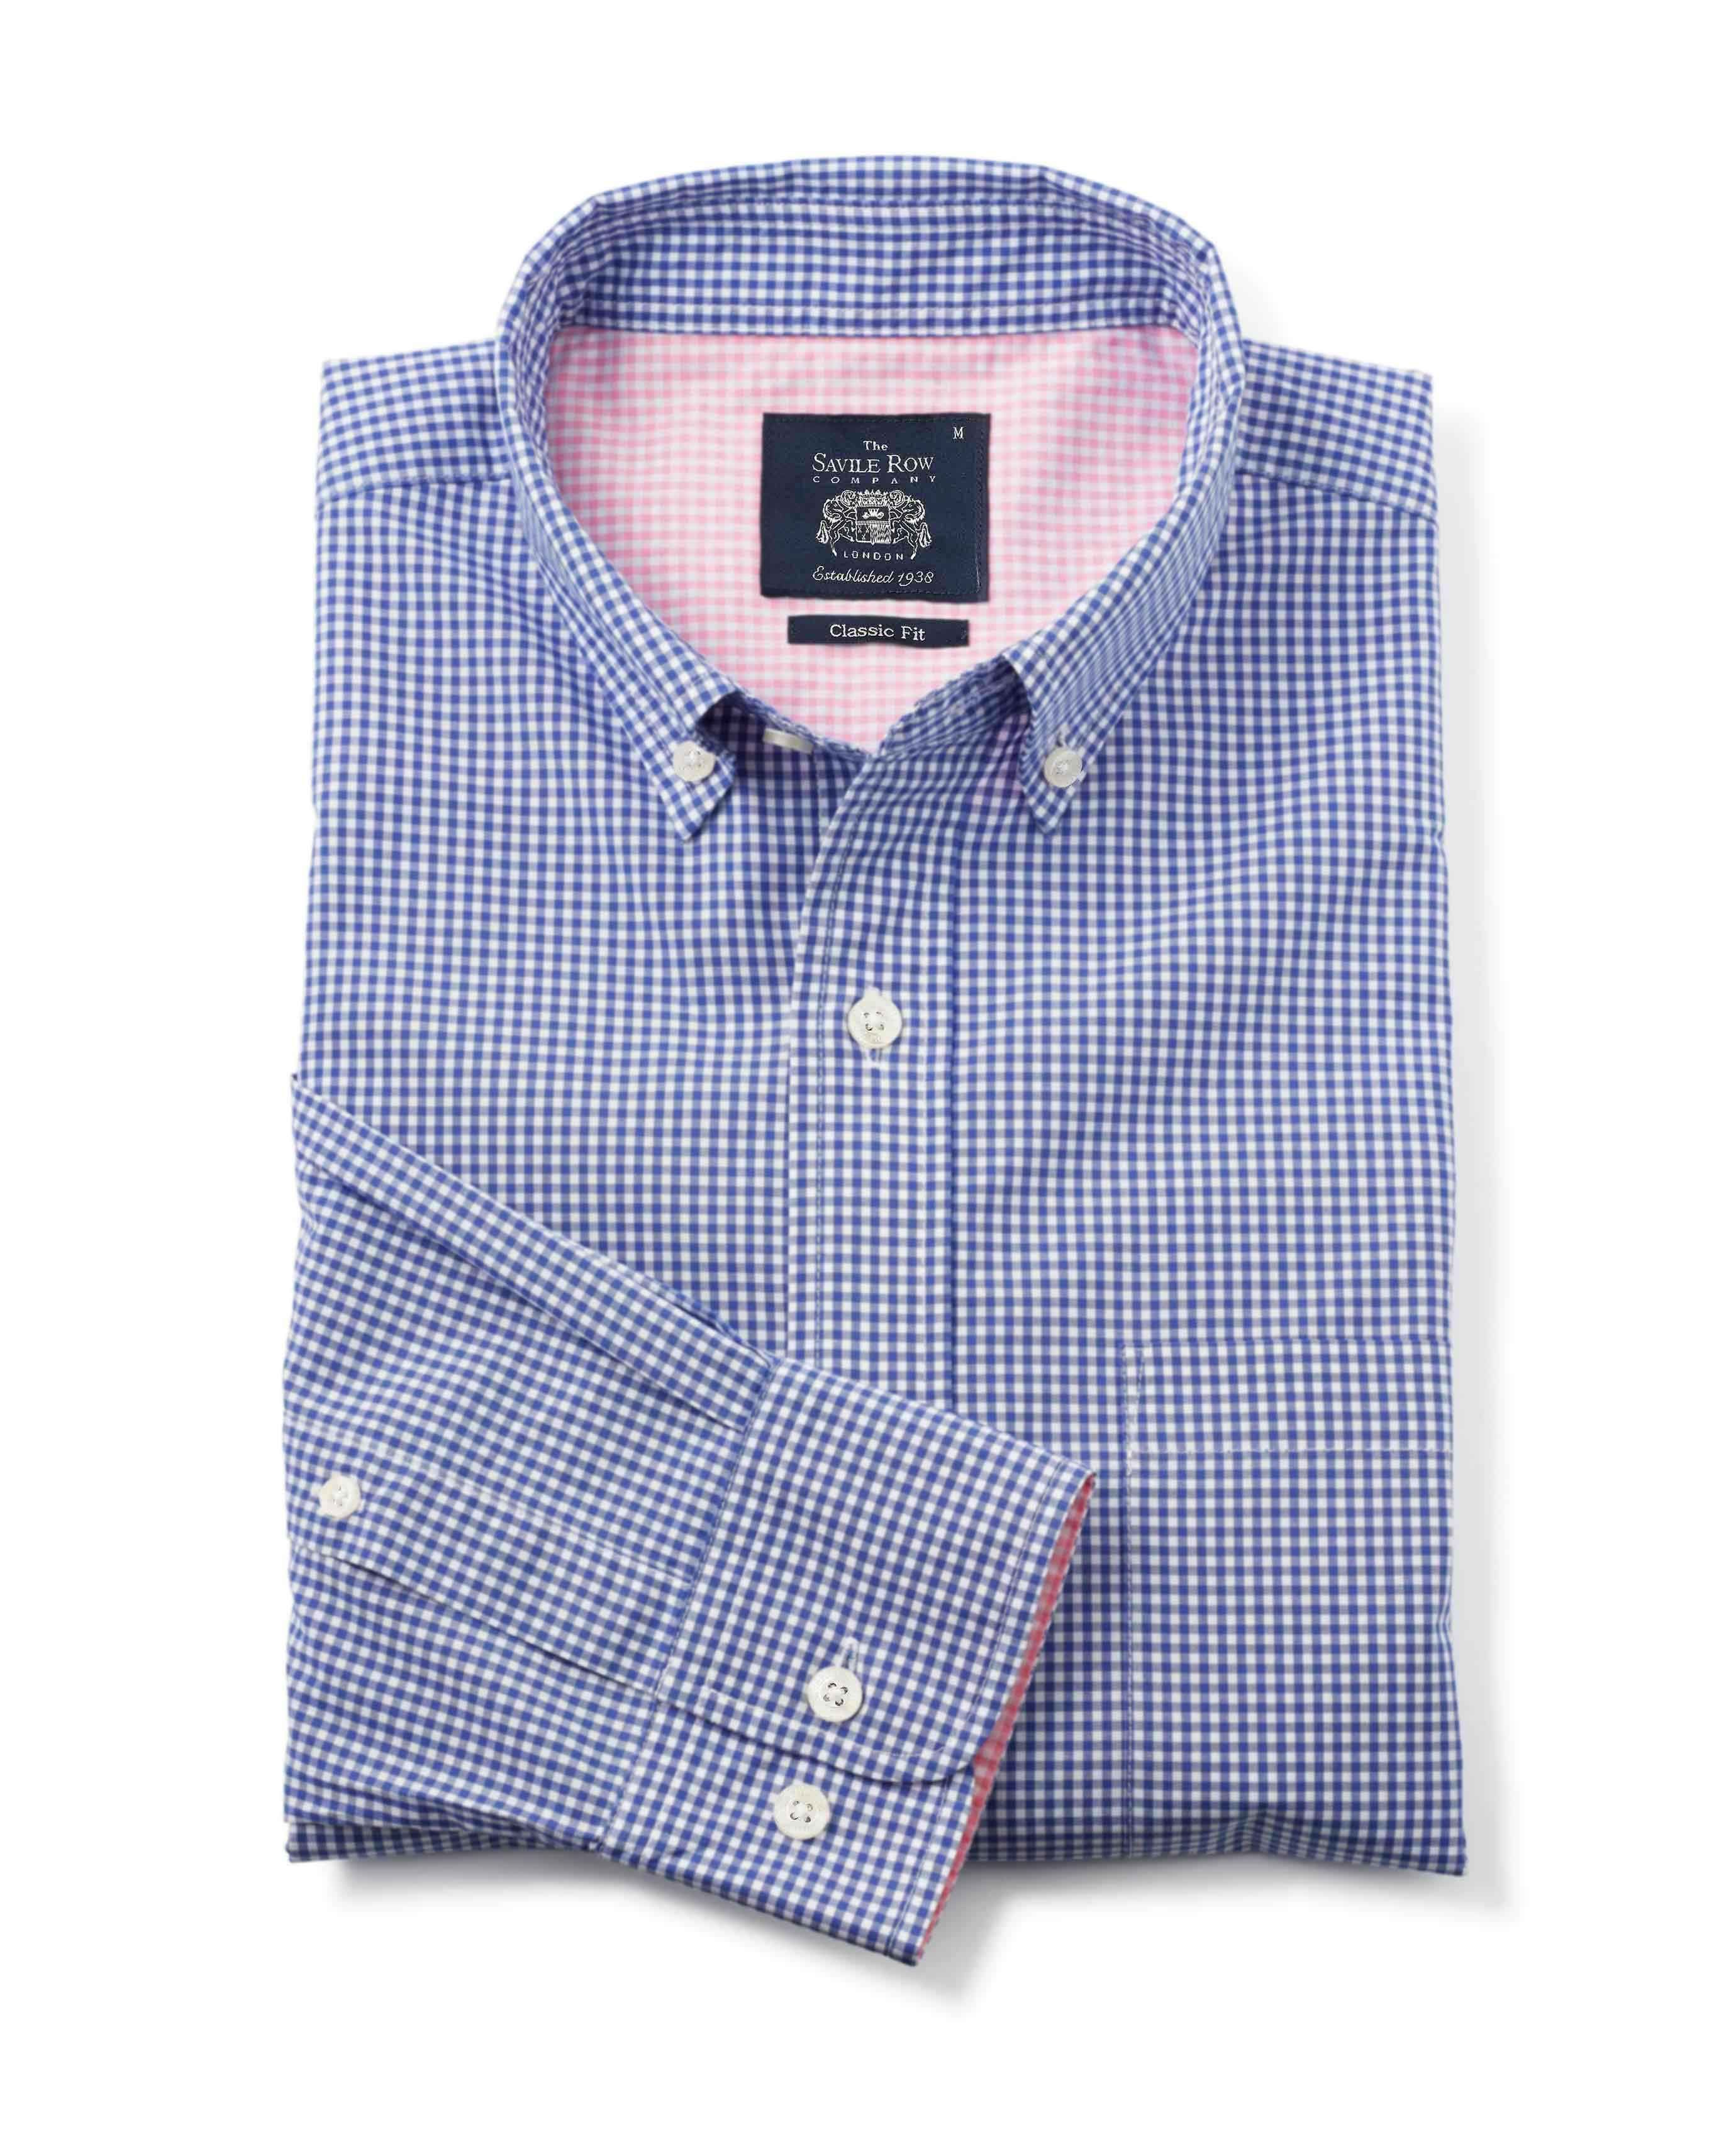 Men's Blue Gingham Check Classic Fit Casual Shirt | Savile Row Co